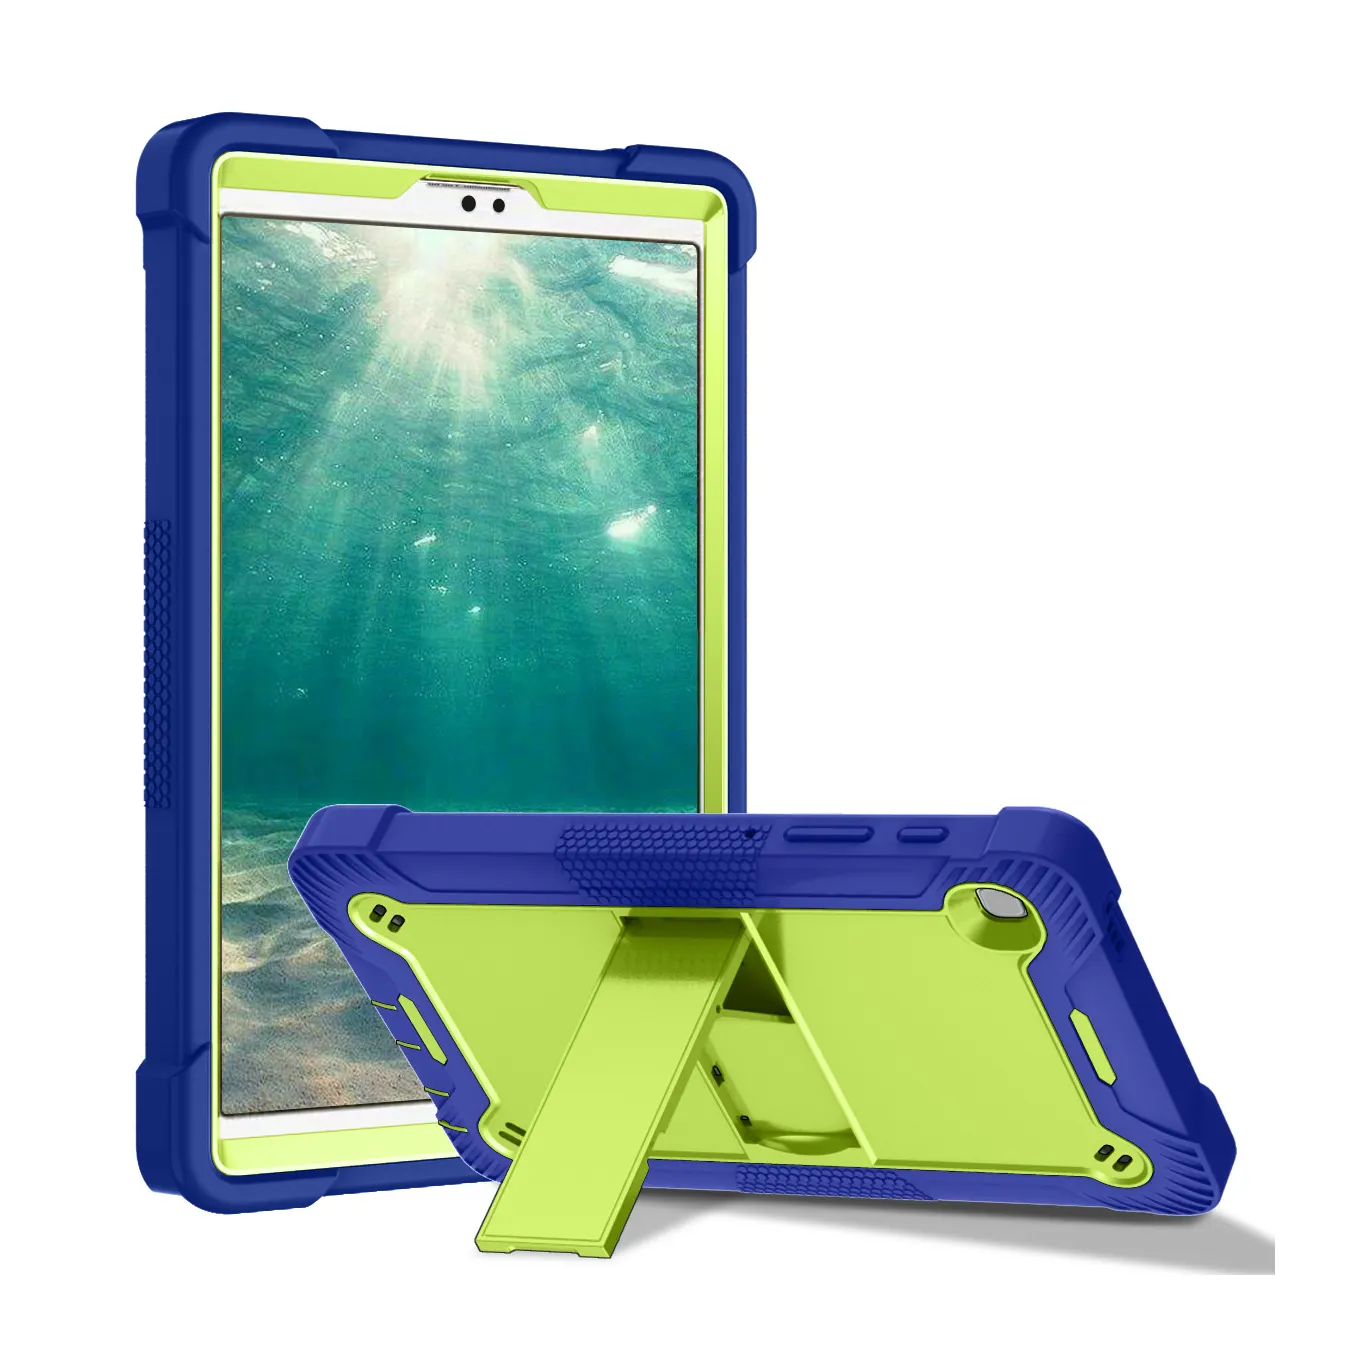 Amazon Hot Selling Ready To Ship Shockproof 3 Layers Built-in Kickstand Kids Tablet Case For Samsung Galaxy Tab A7 Lite Case